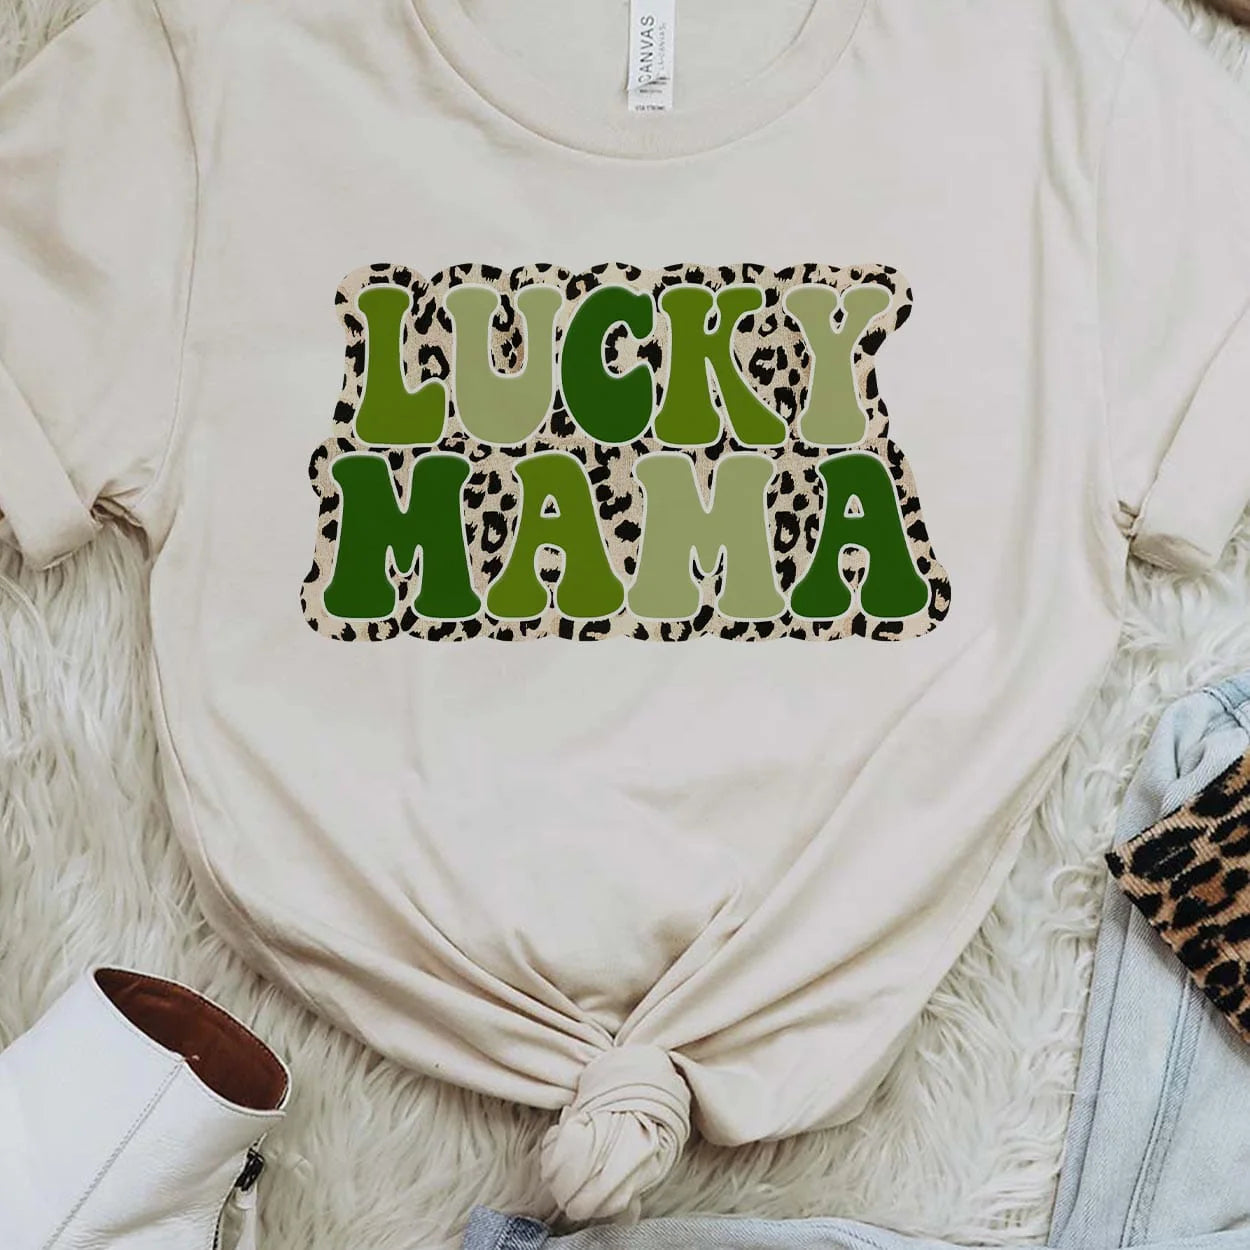 A white crew neck sweatshirt featuring the words "Lucky mama" in various shades of green with a small leopard border around the text. Item is pictured on a white background.